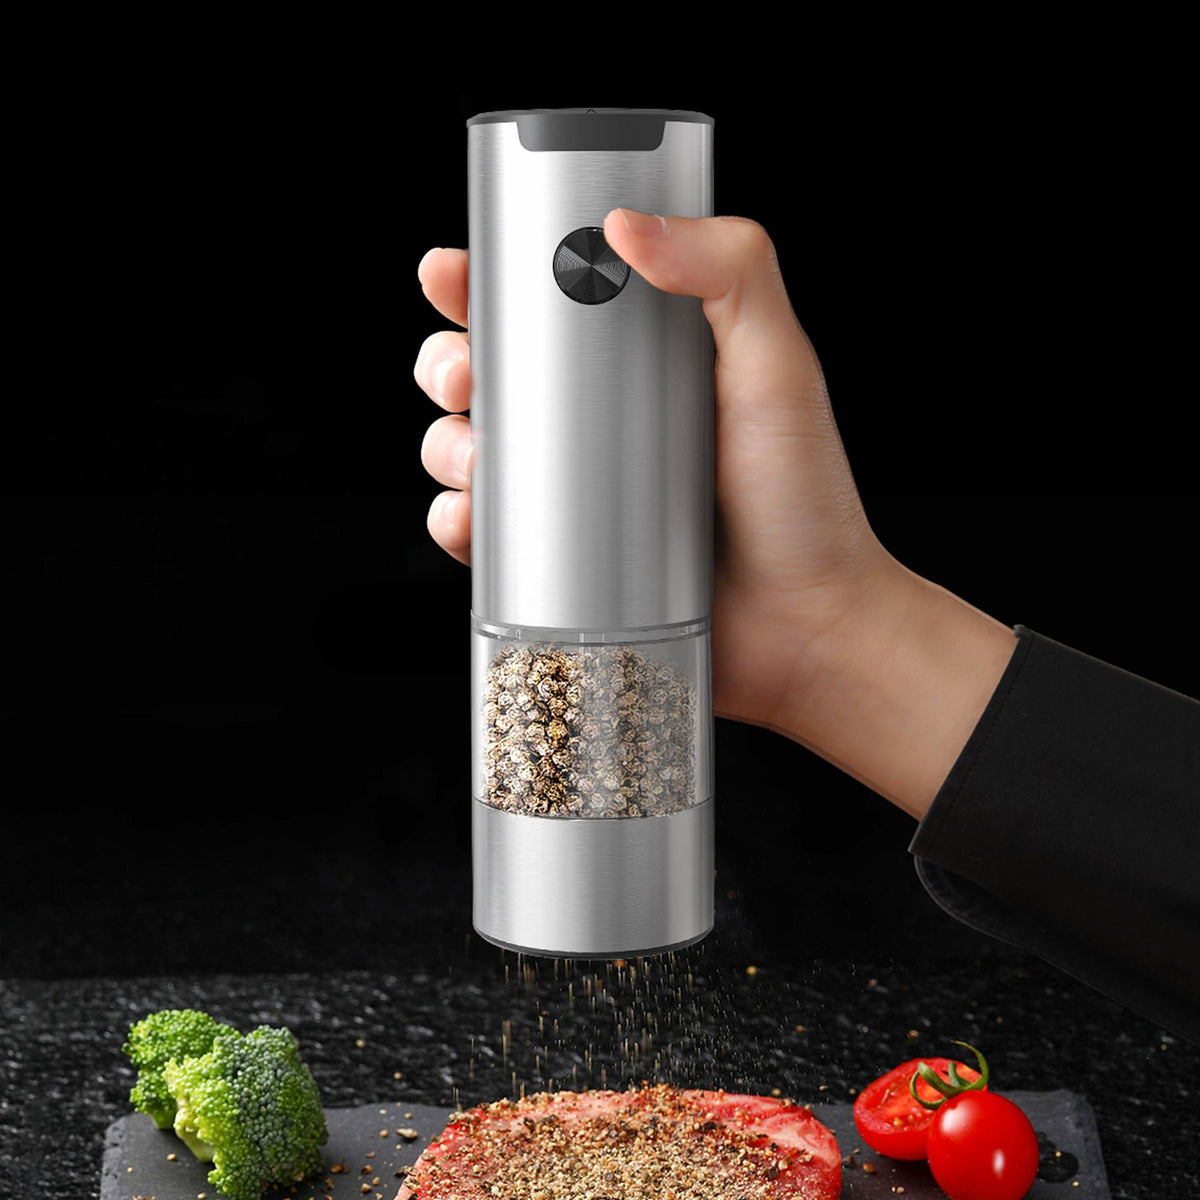 PepperPro Electric Grinder: Fresh Ground Black Pepper at the Touch of a Button